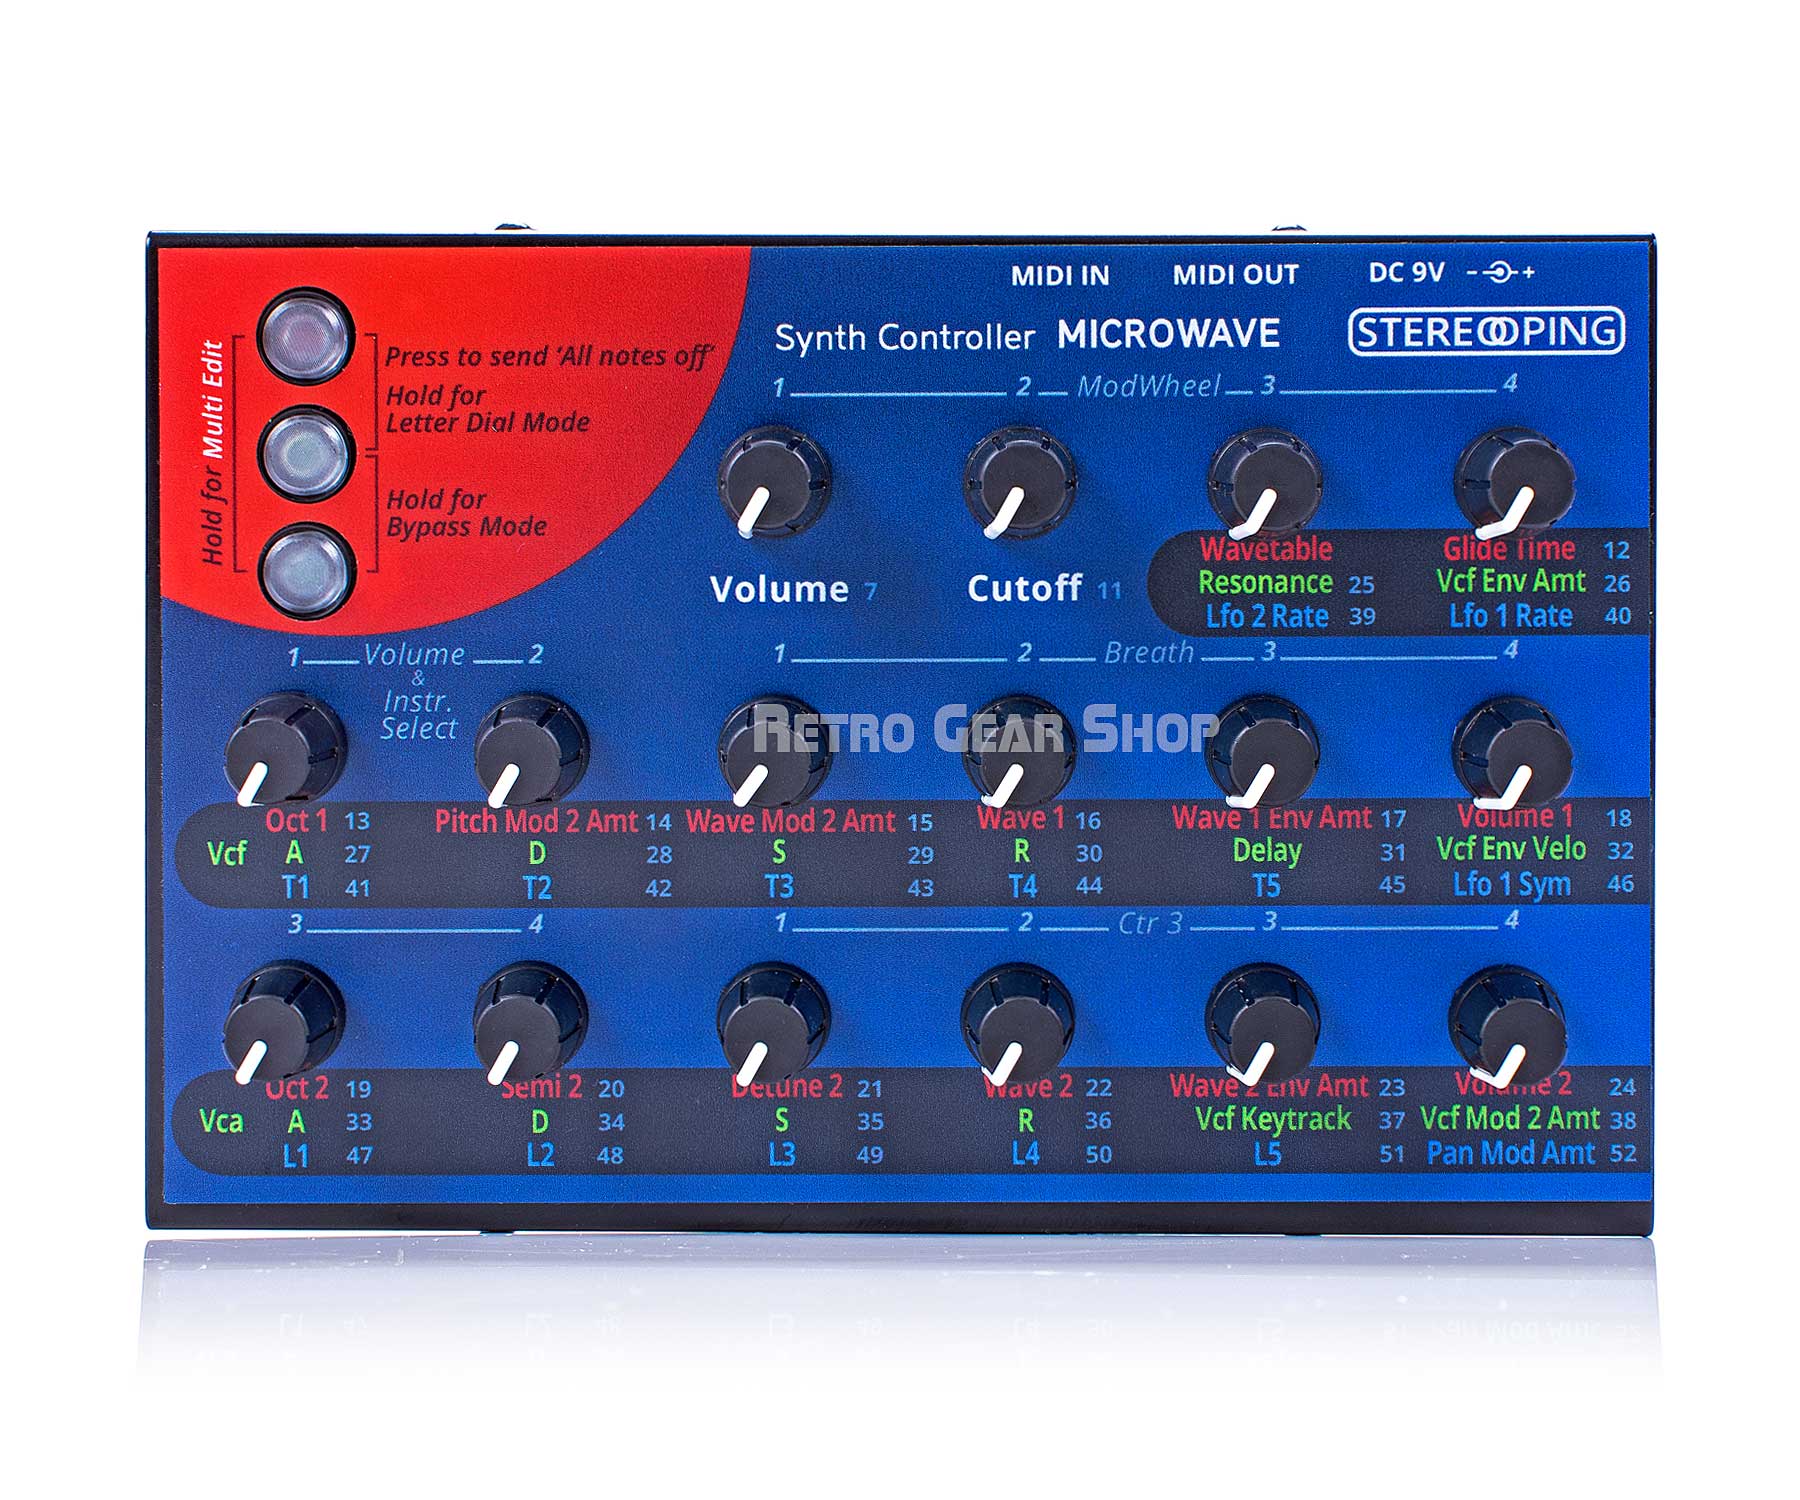 Stereoping CE-1 Microwave Midi Controller Top